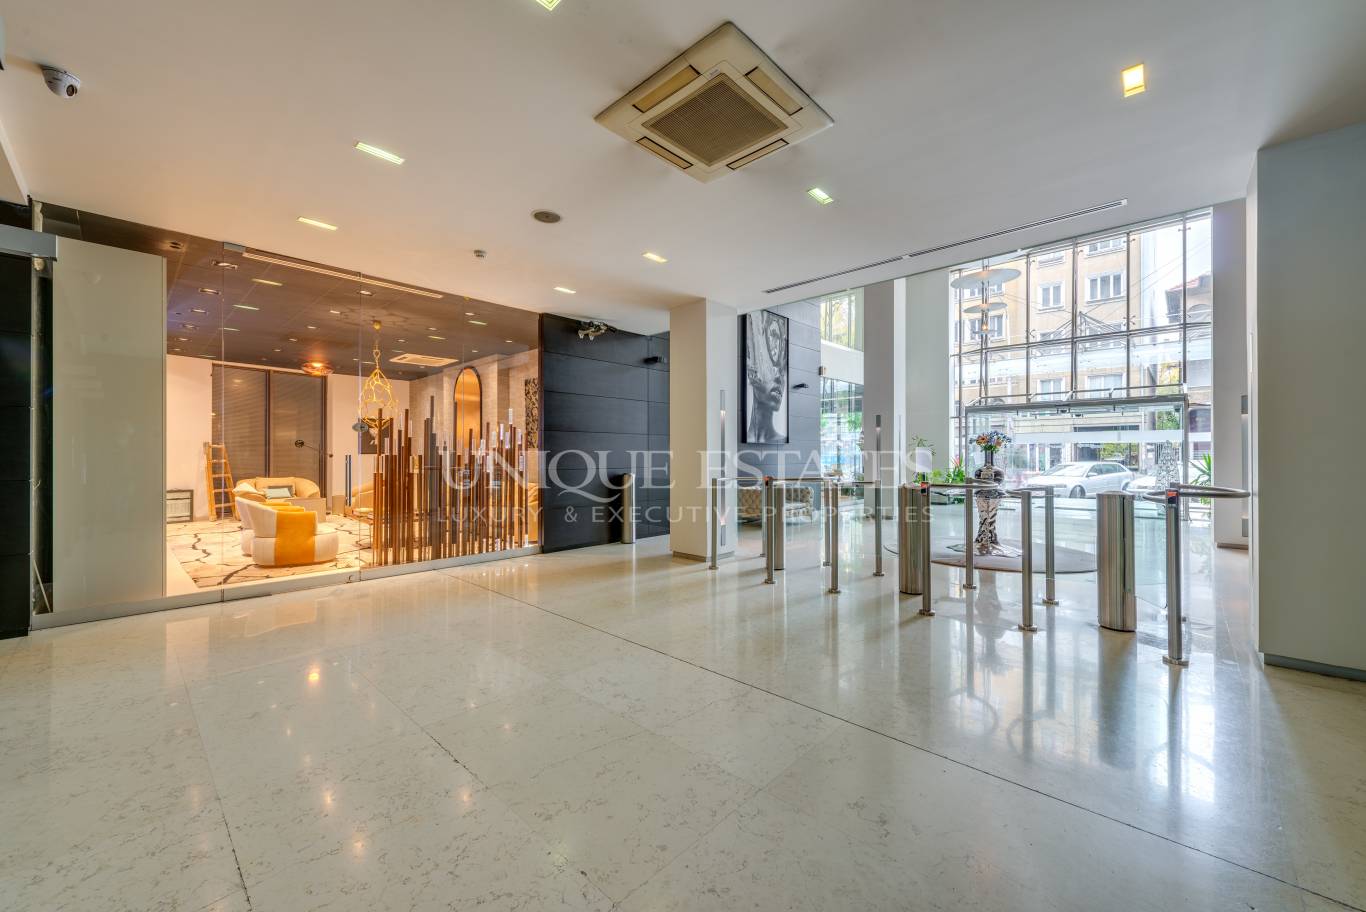 Office for rent in Sofia, Downtown with listing ID: K6156 - image 1